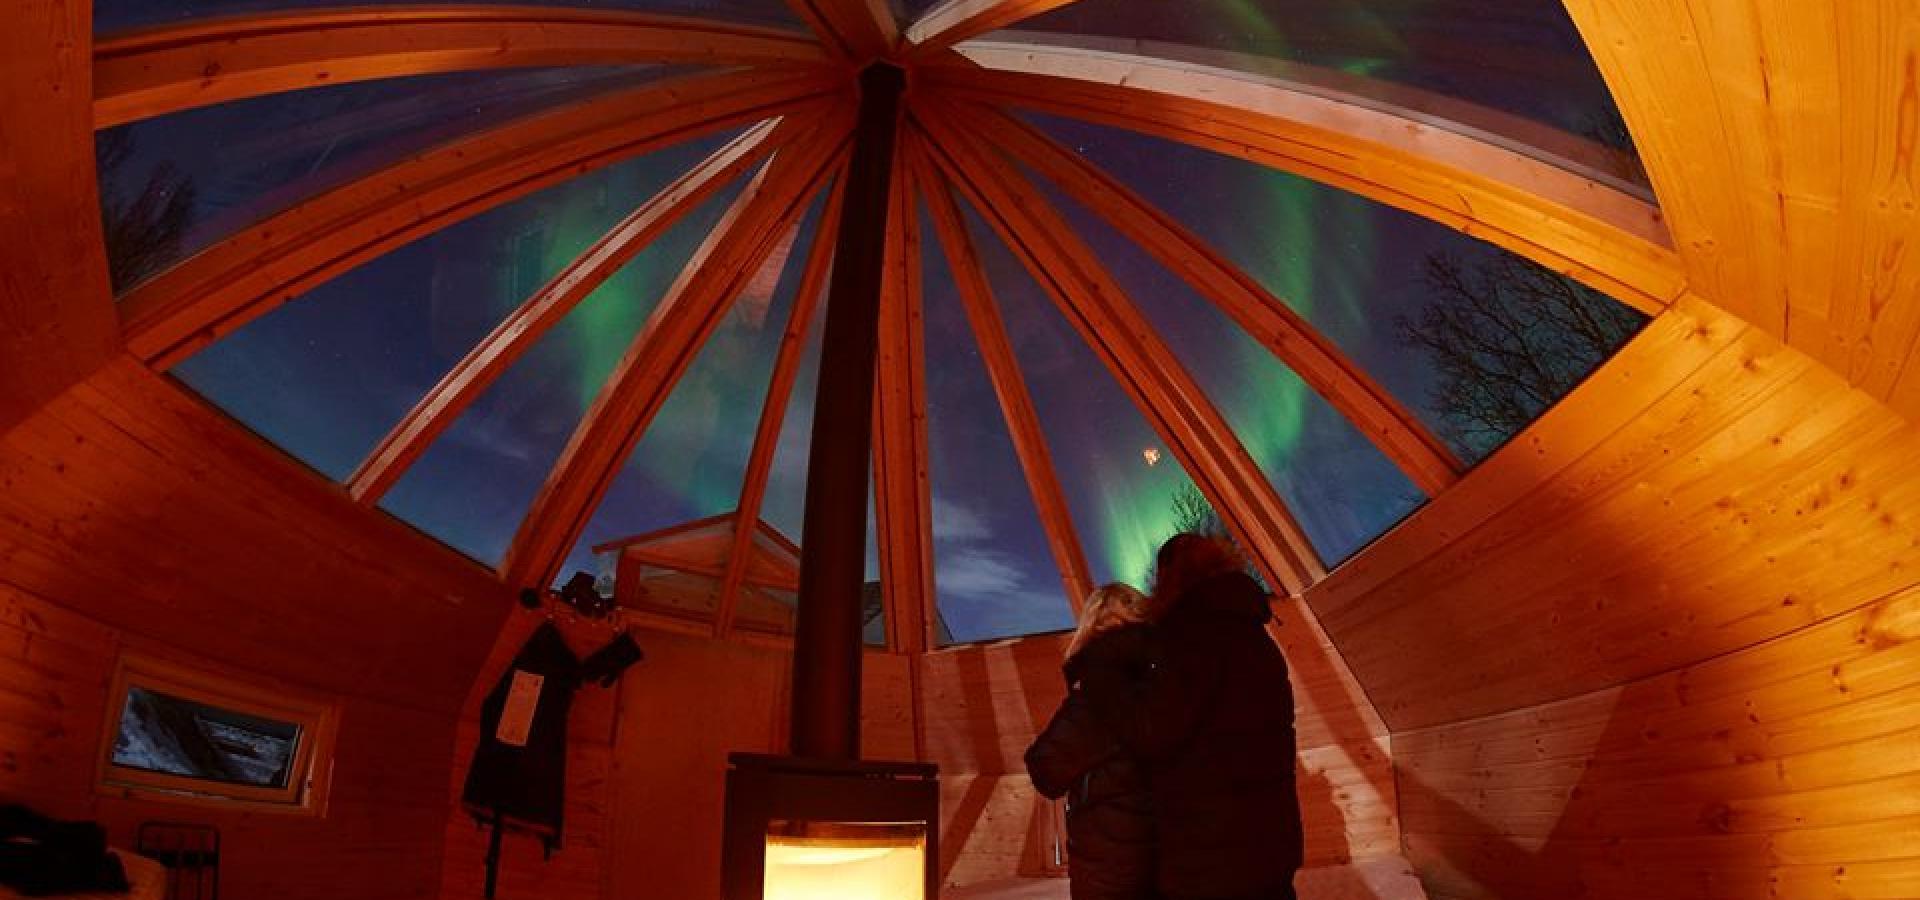 Two persons embrazing and looking up at the northern lights, through the glass roof of the wooden iglo